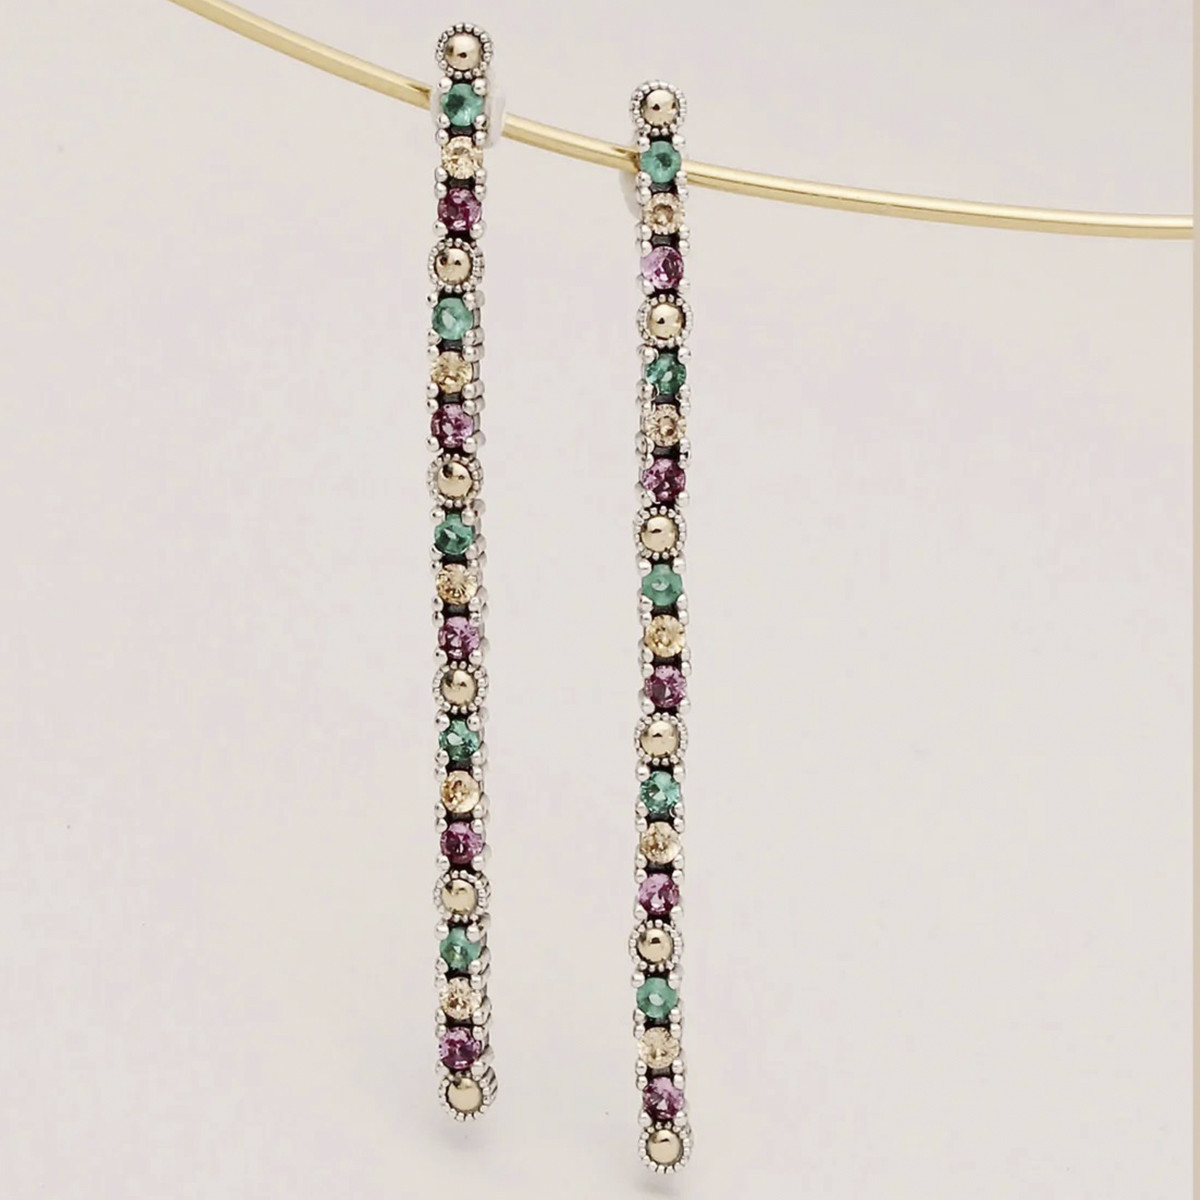 ARTICULATED EARRINGS WITH STONES